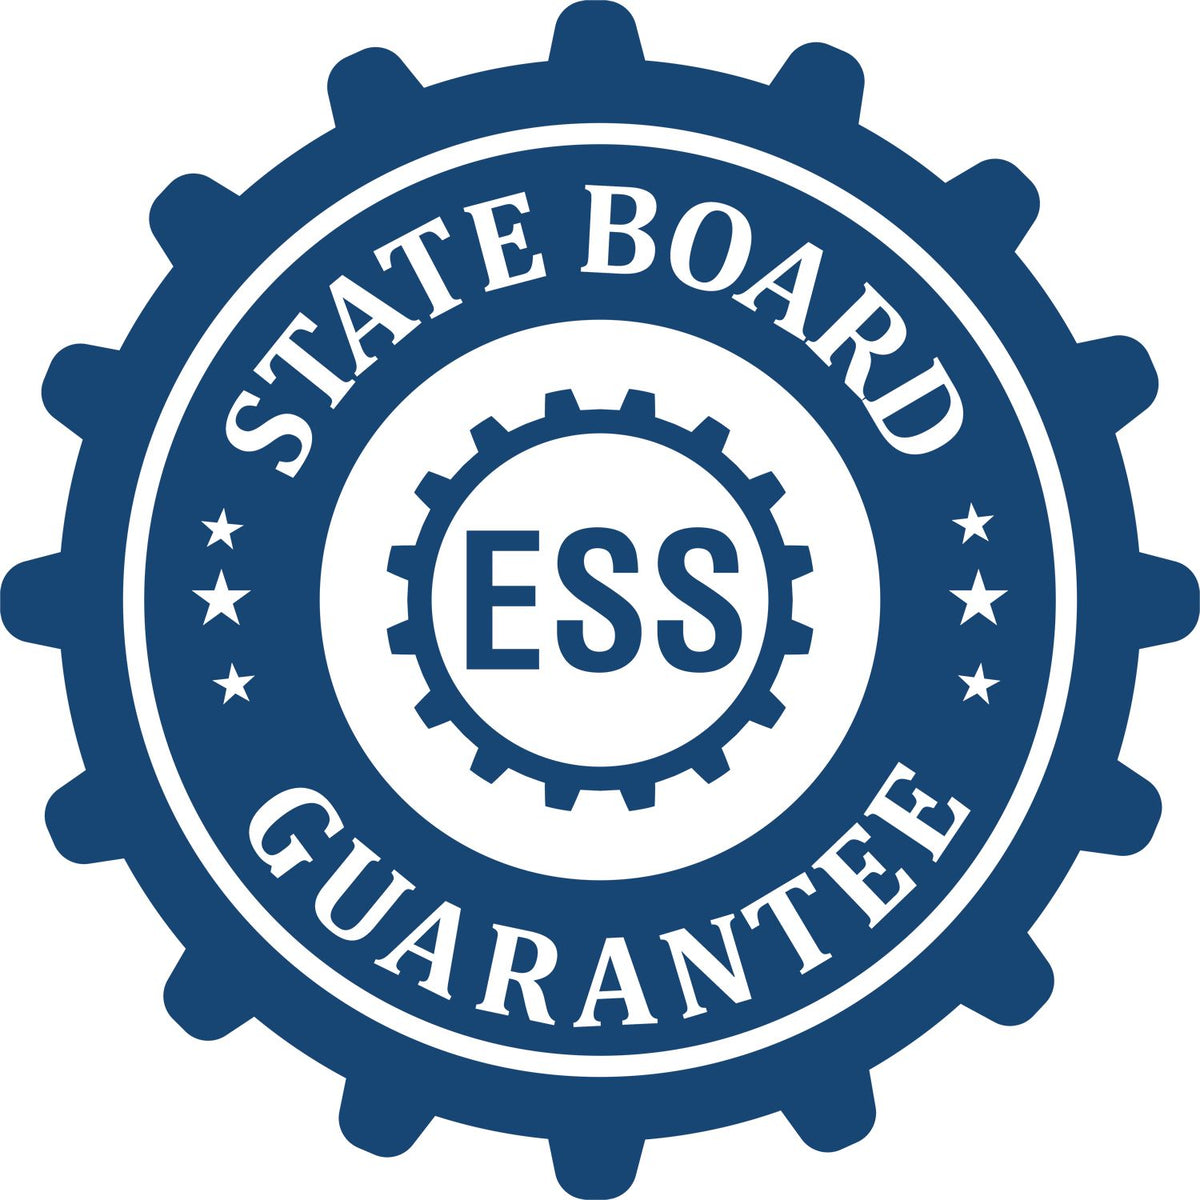 An emblem in a gear shape illustrating a state board guarantee for the Premium MaxLight Pre-Inked Kentucky Engineering Stamp product.